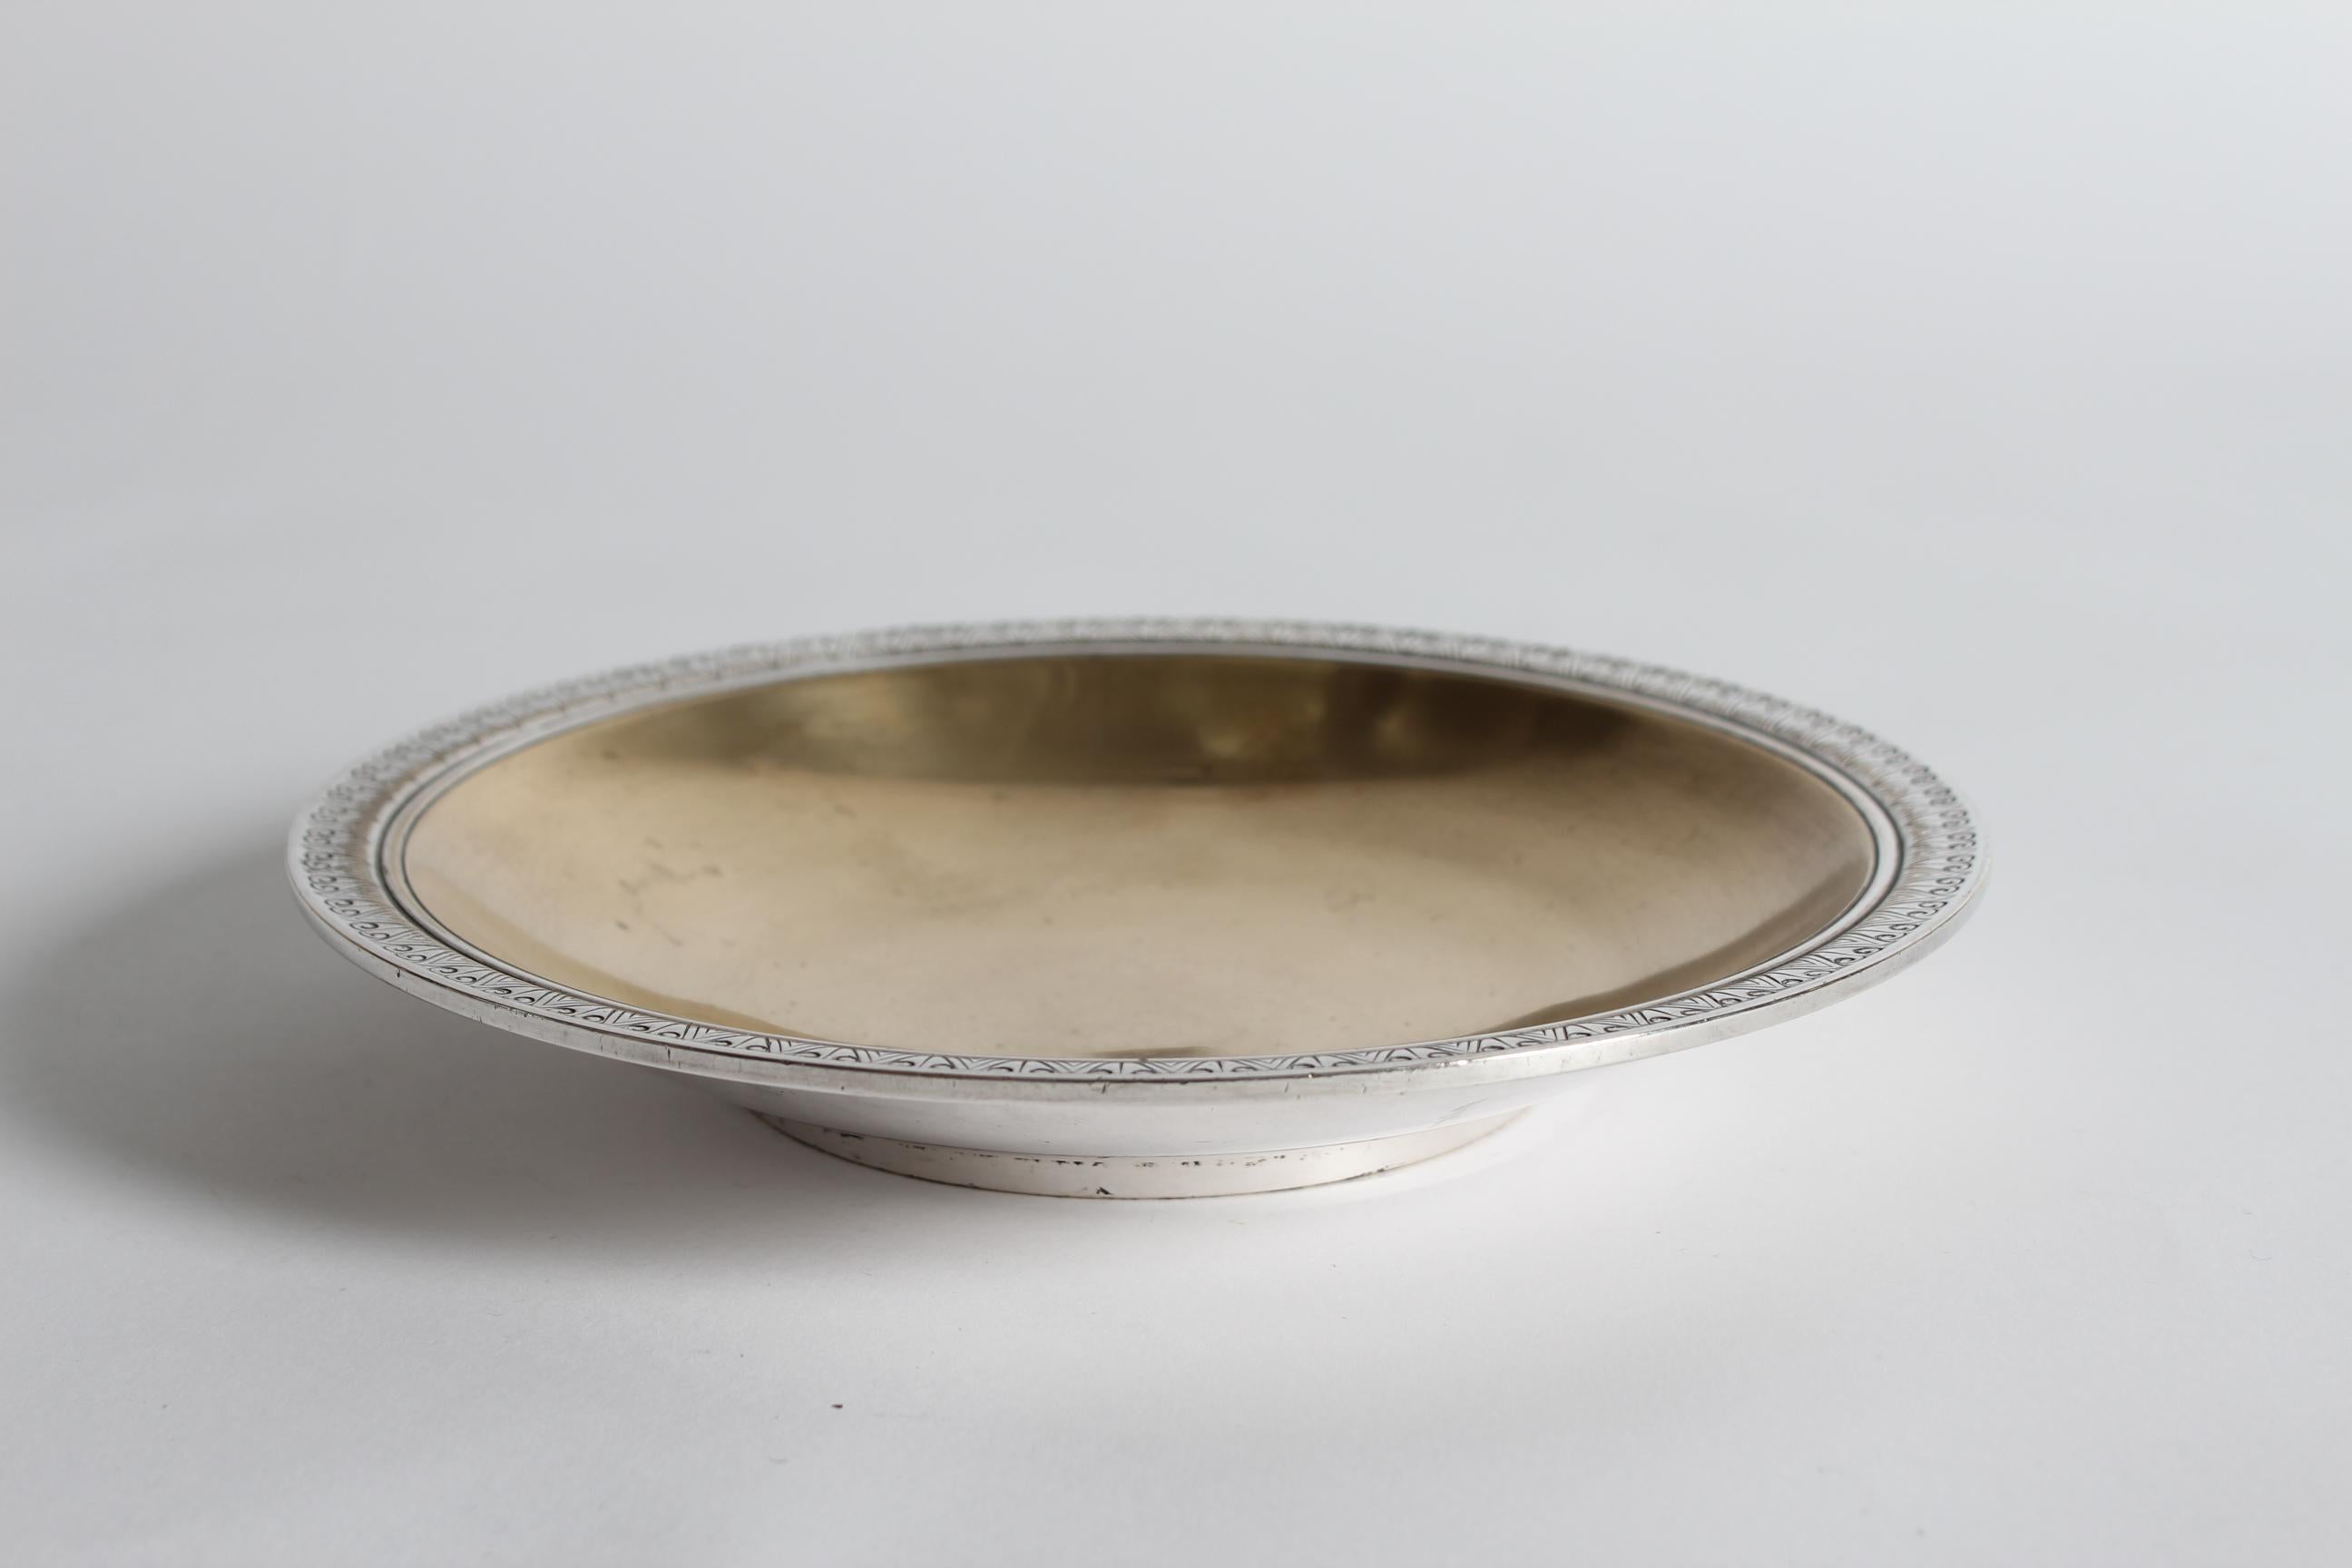 Metalwork Danish Art Deco Just Andersen Decorative Bronze Bowl with Silver and Gold 1930s For Sale